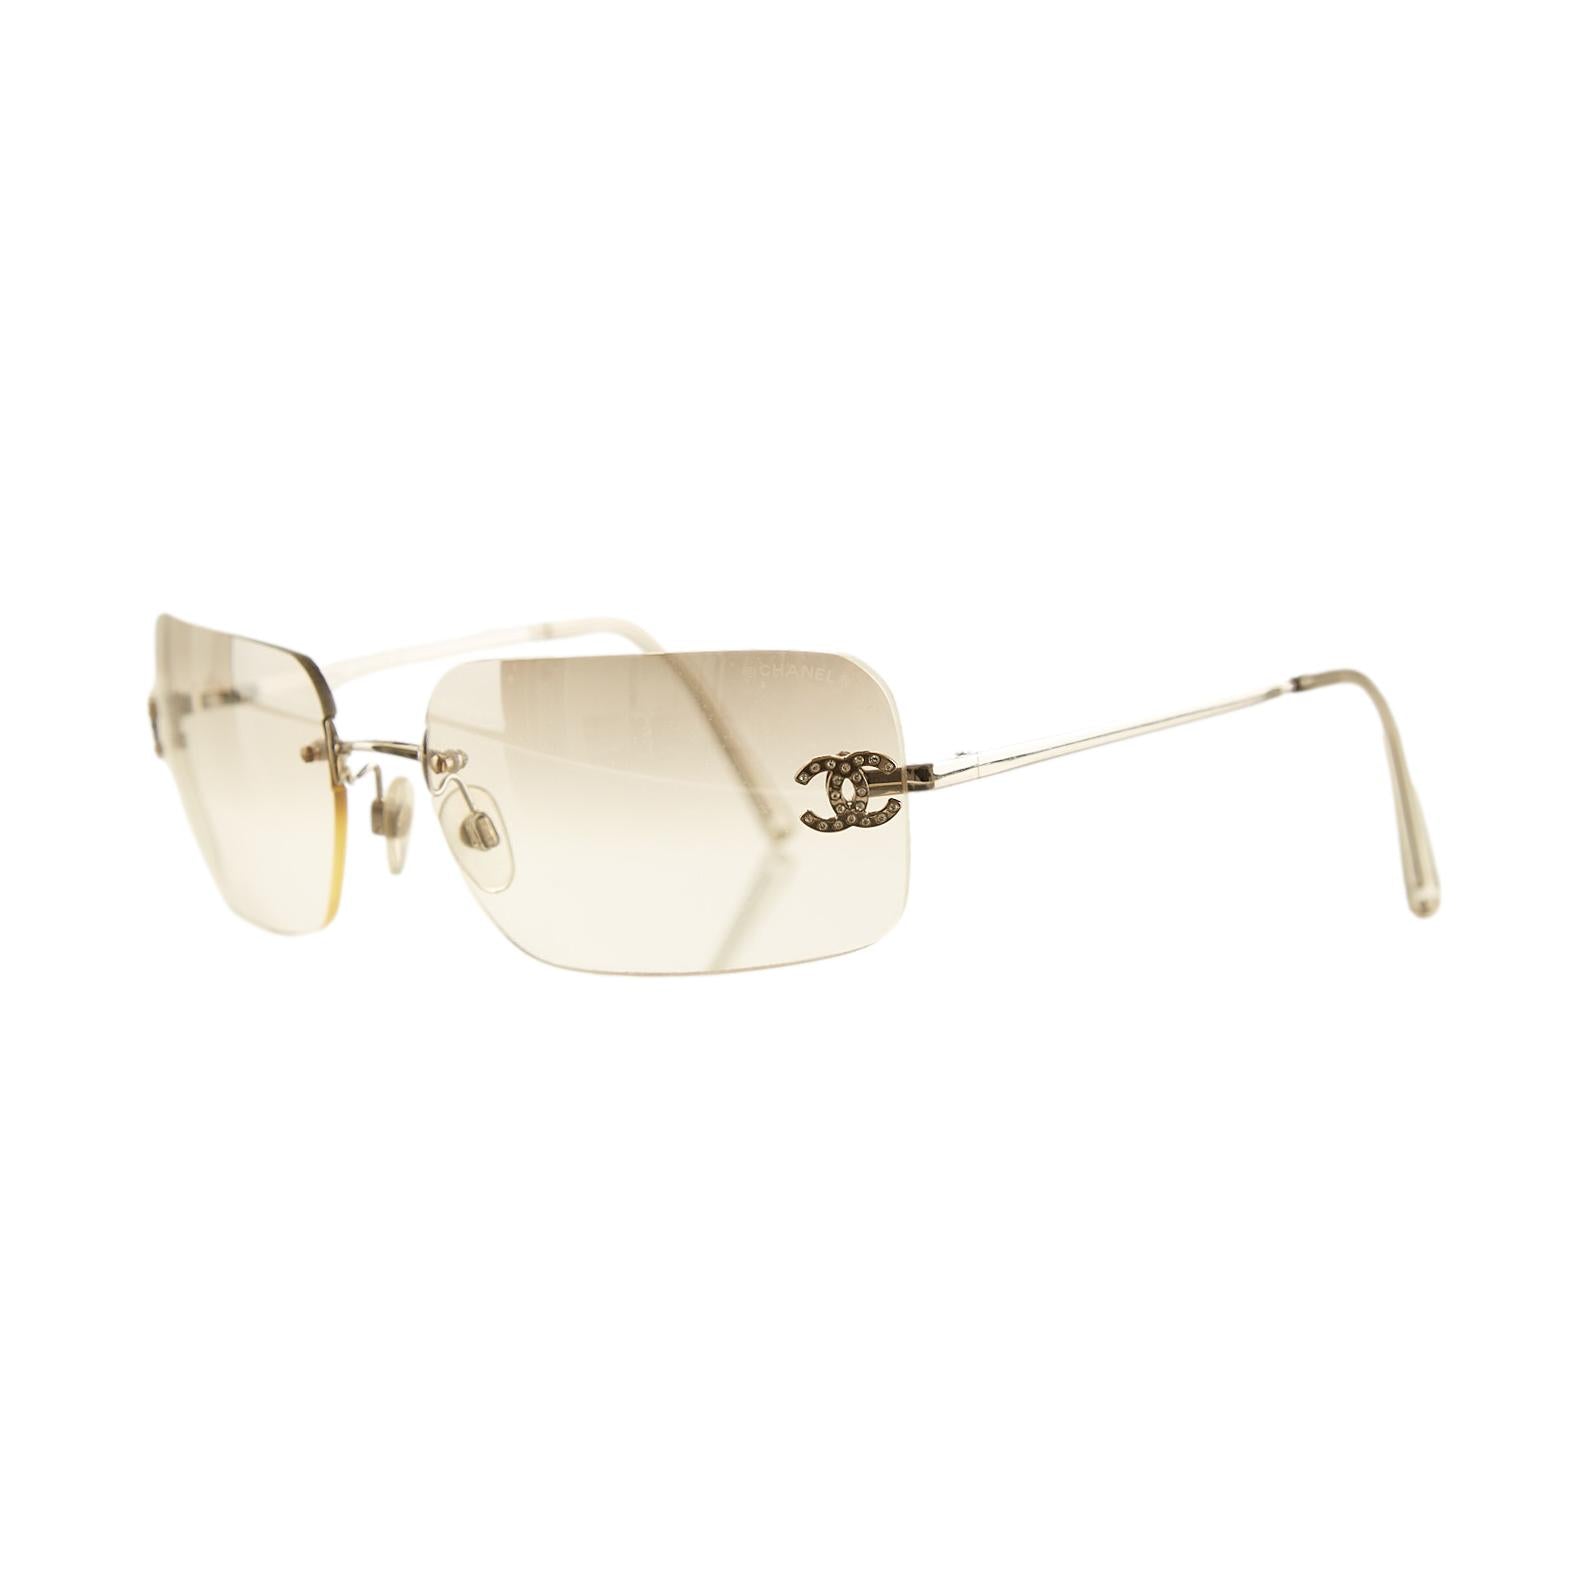 Chanel Clear Sunglasses Os / One Time Rent